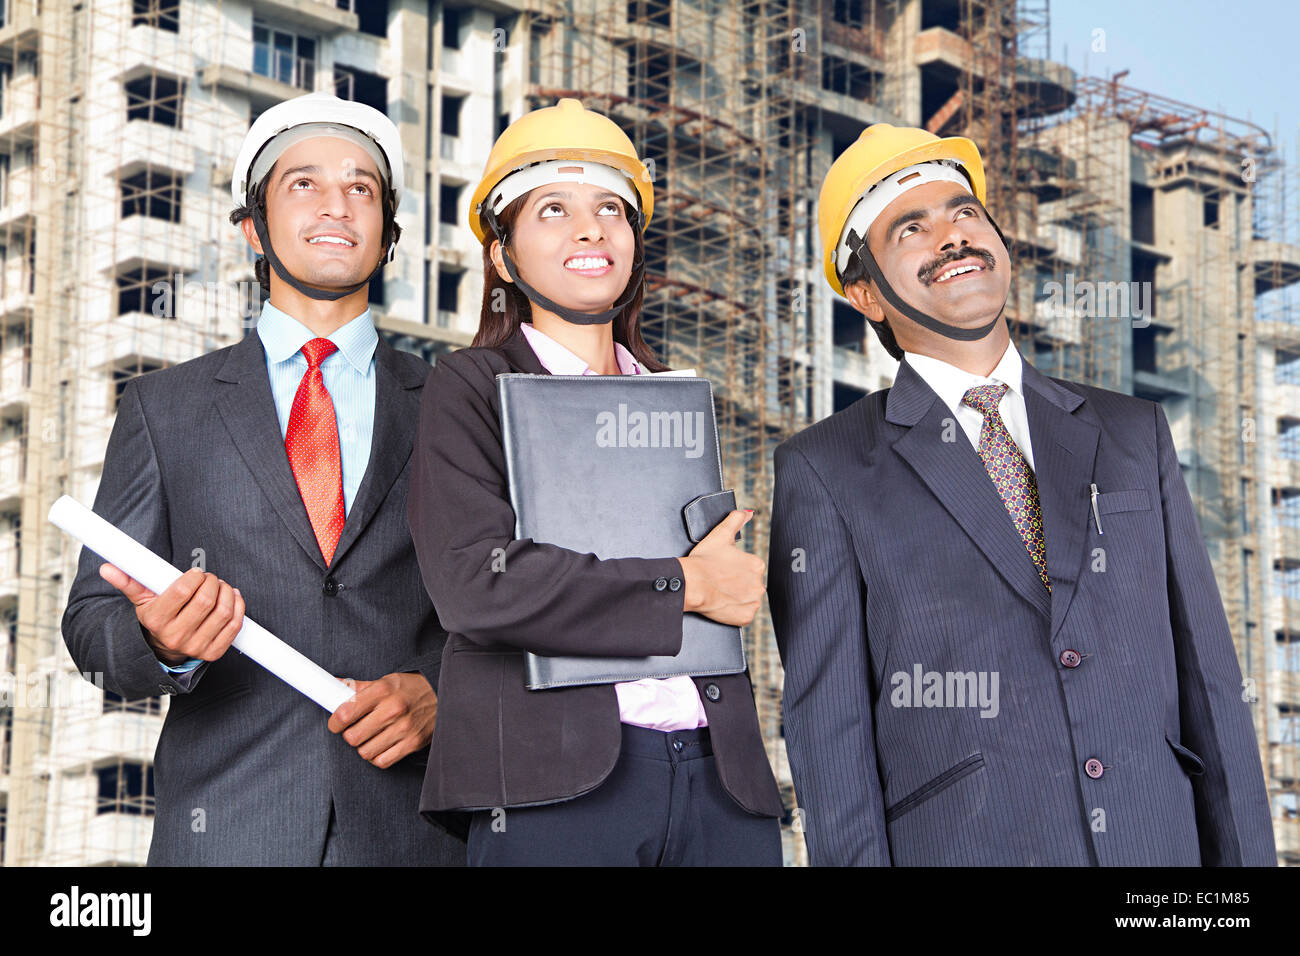 3 indian Builders Construction site Stock Photo